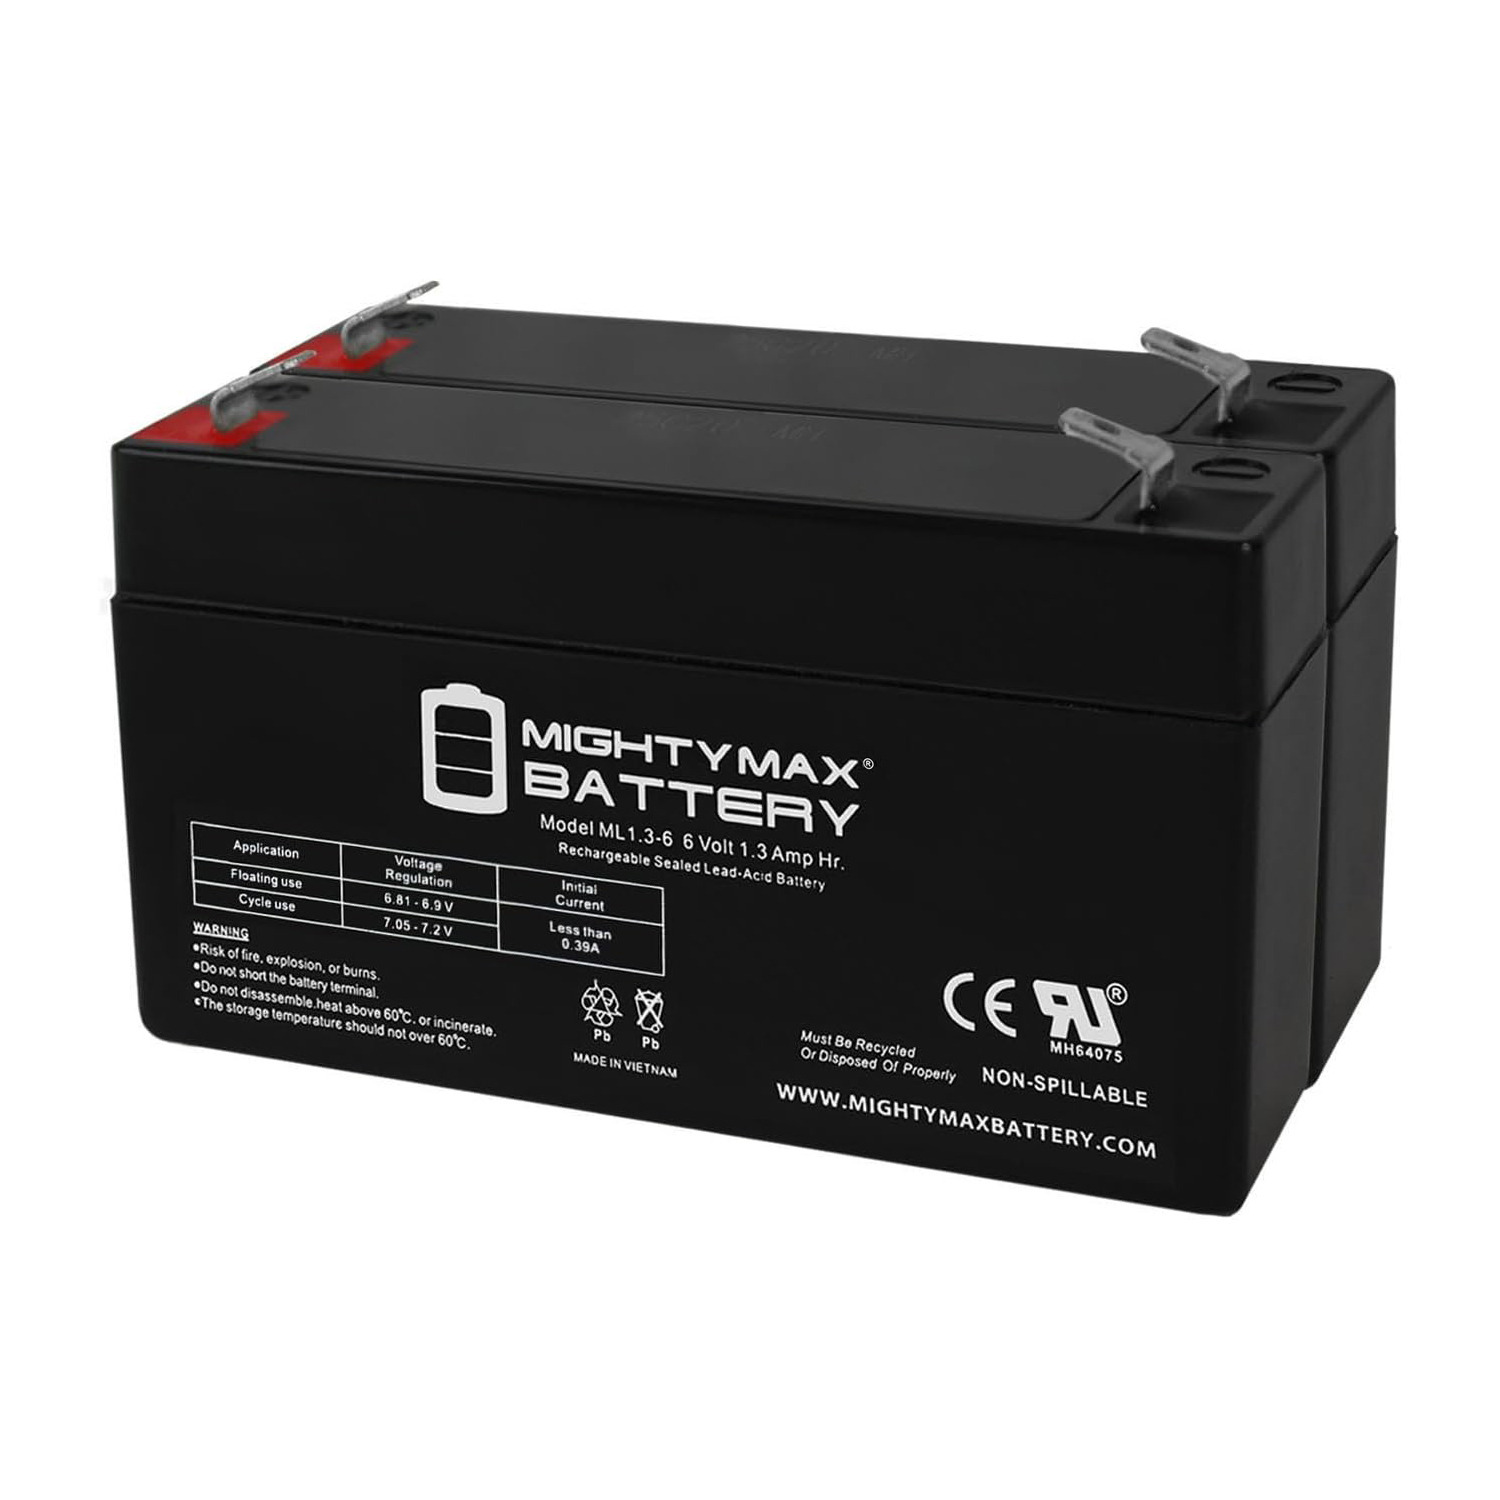 6V 1.3Ah SLA BATTERY REPLACEMENT PC612 NP1.2-6 PS-612 - 2 Pack